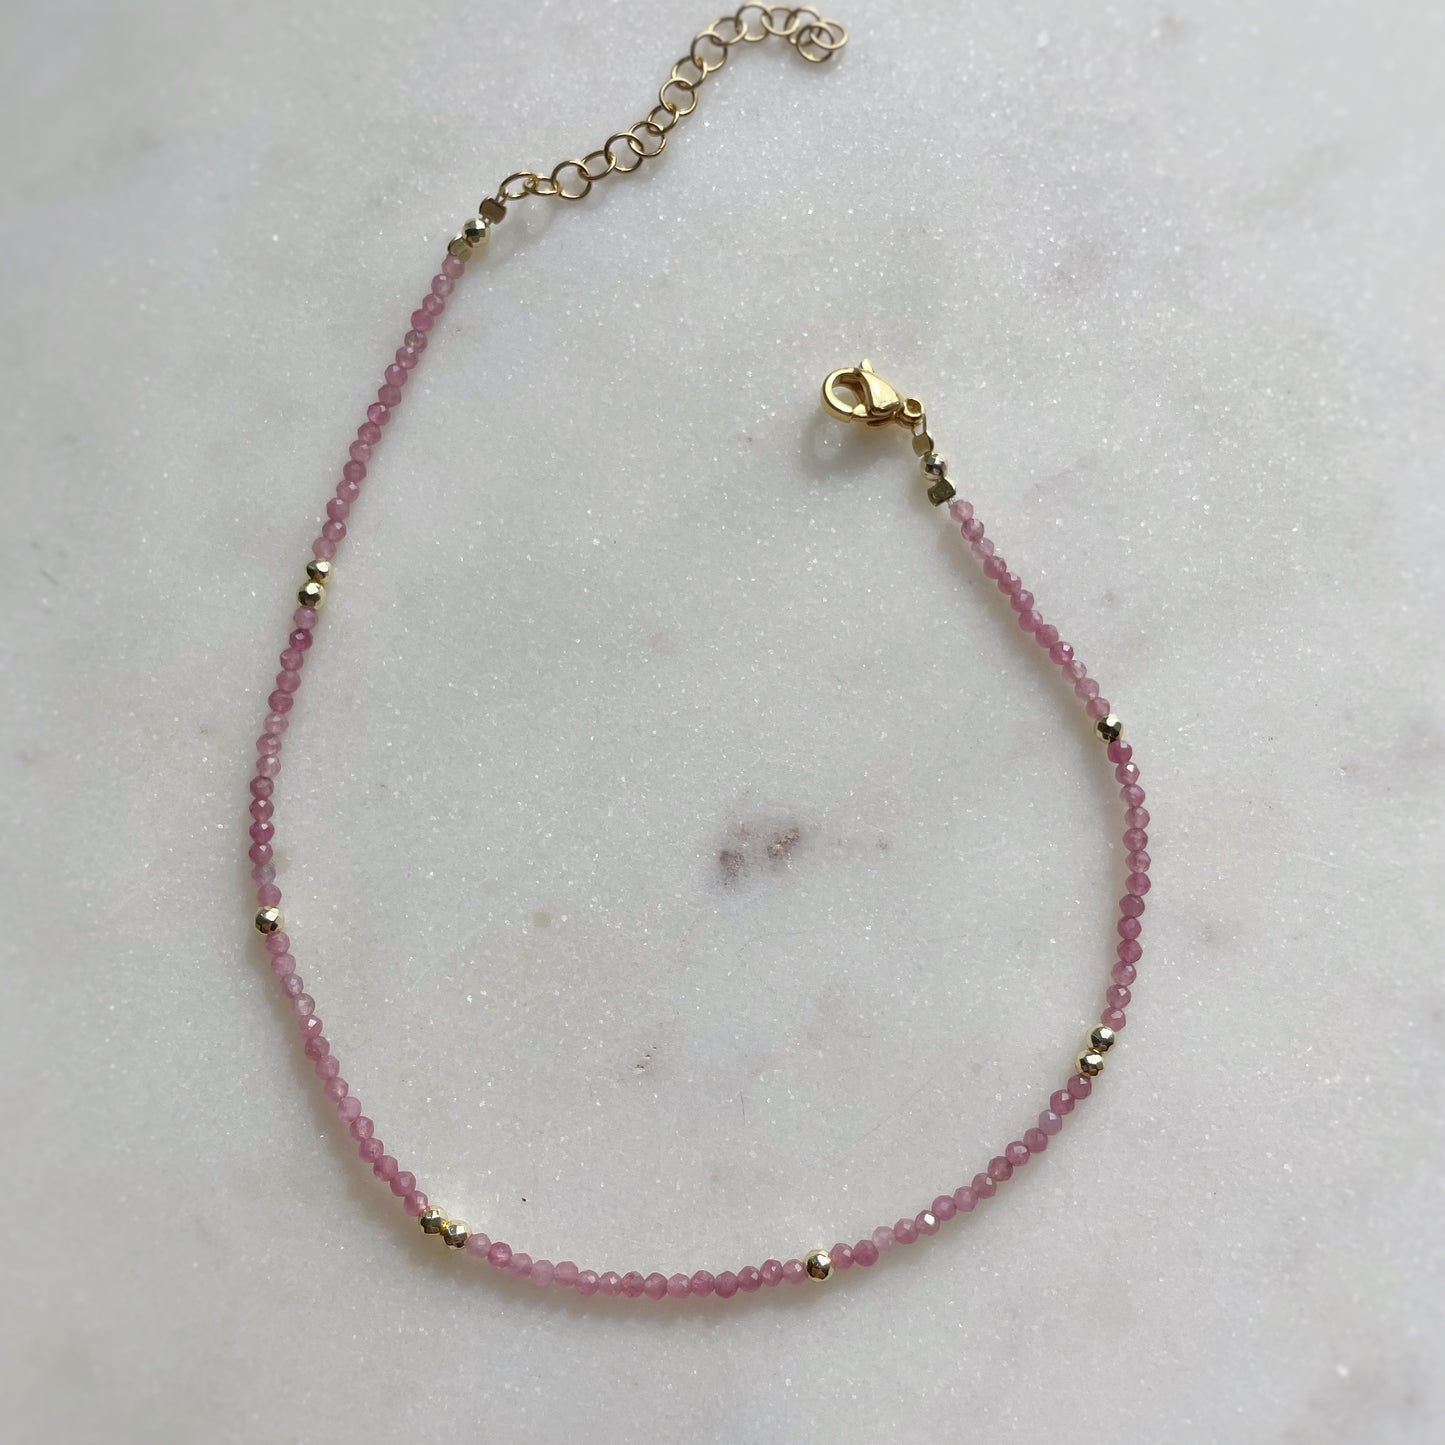 Seed beads crystal anklet